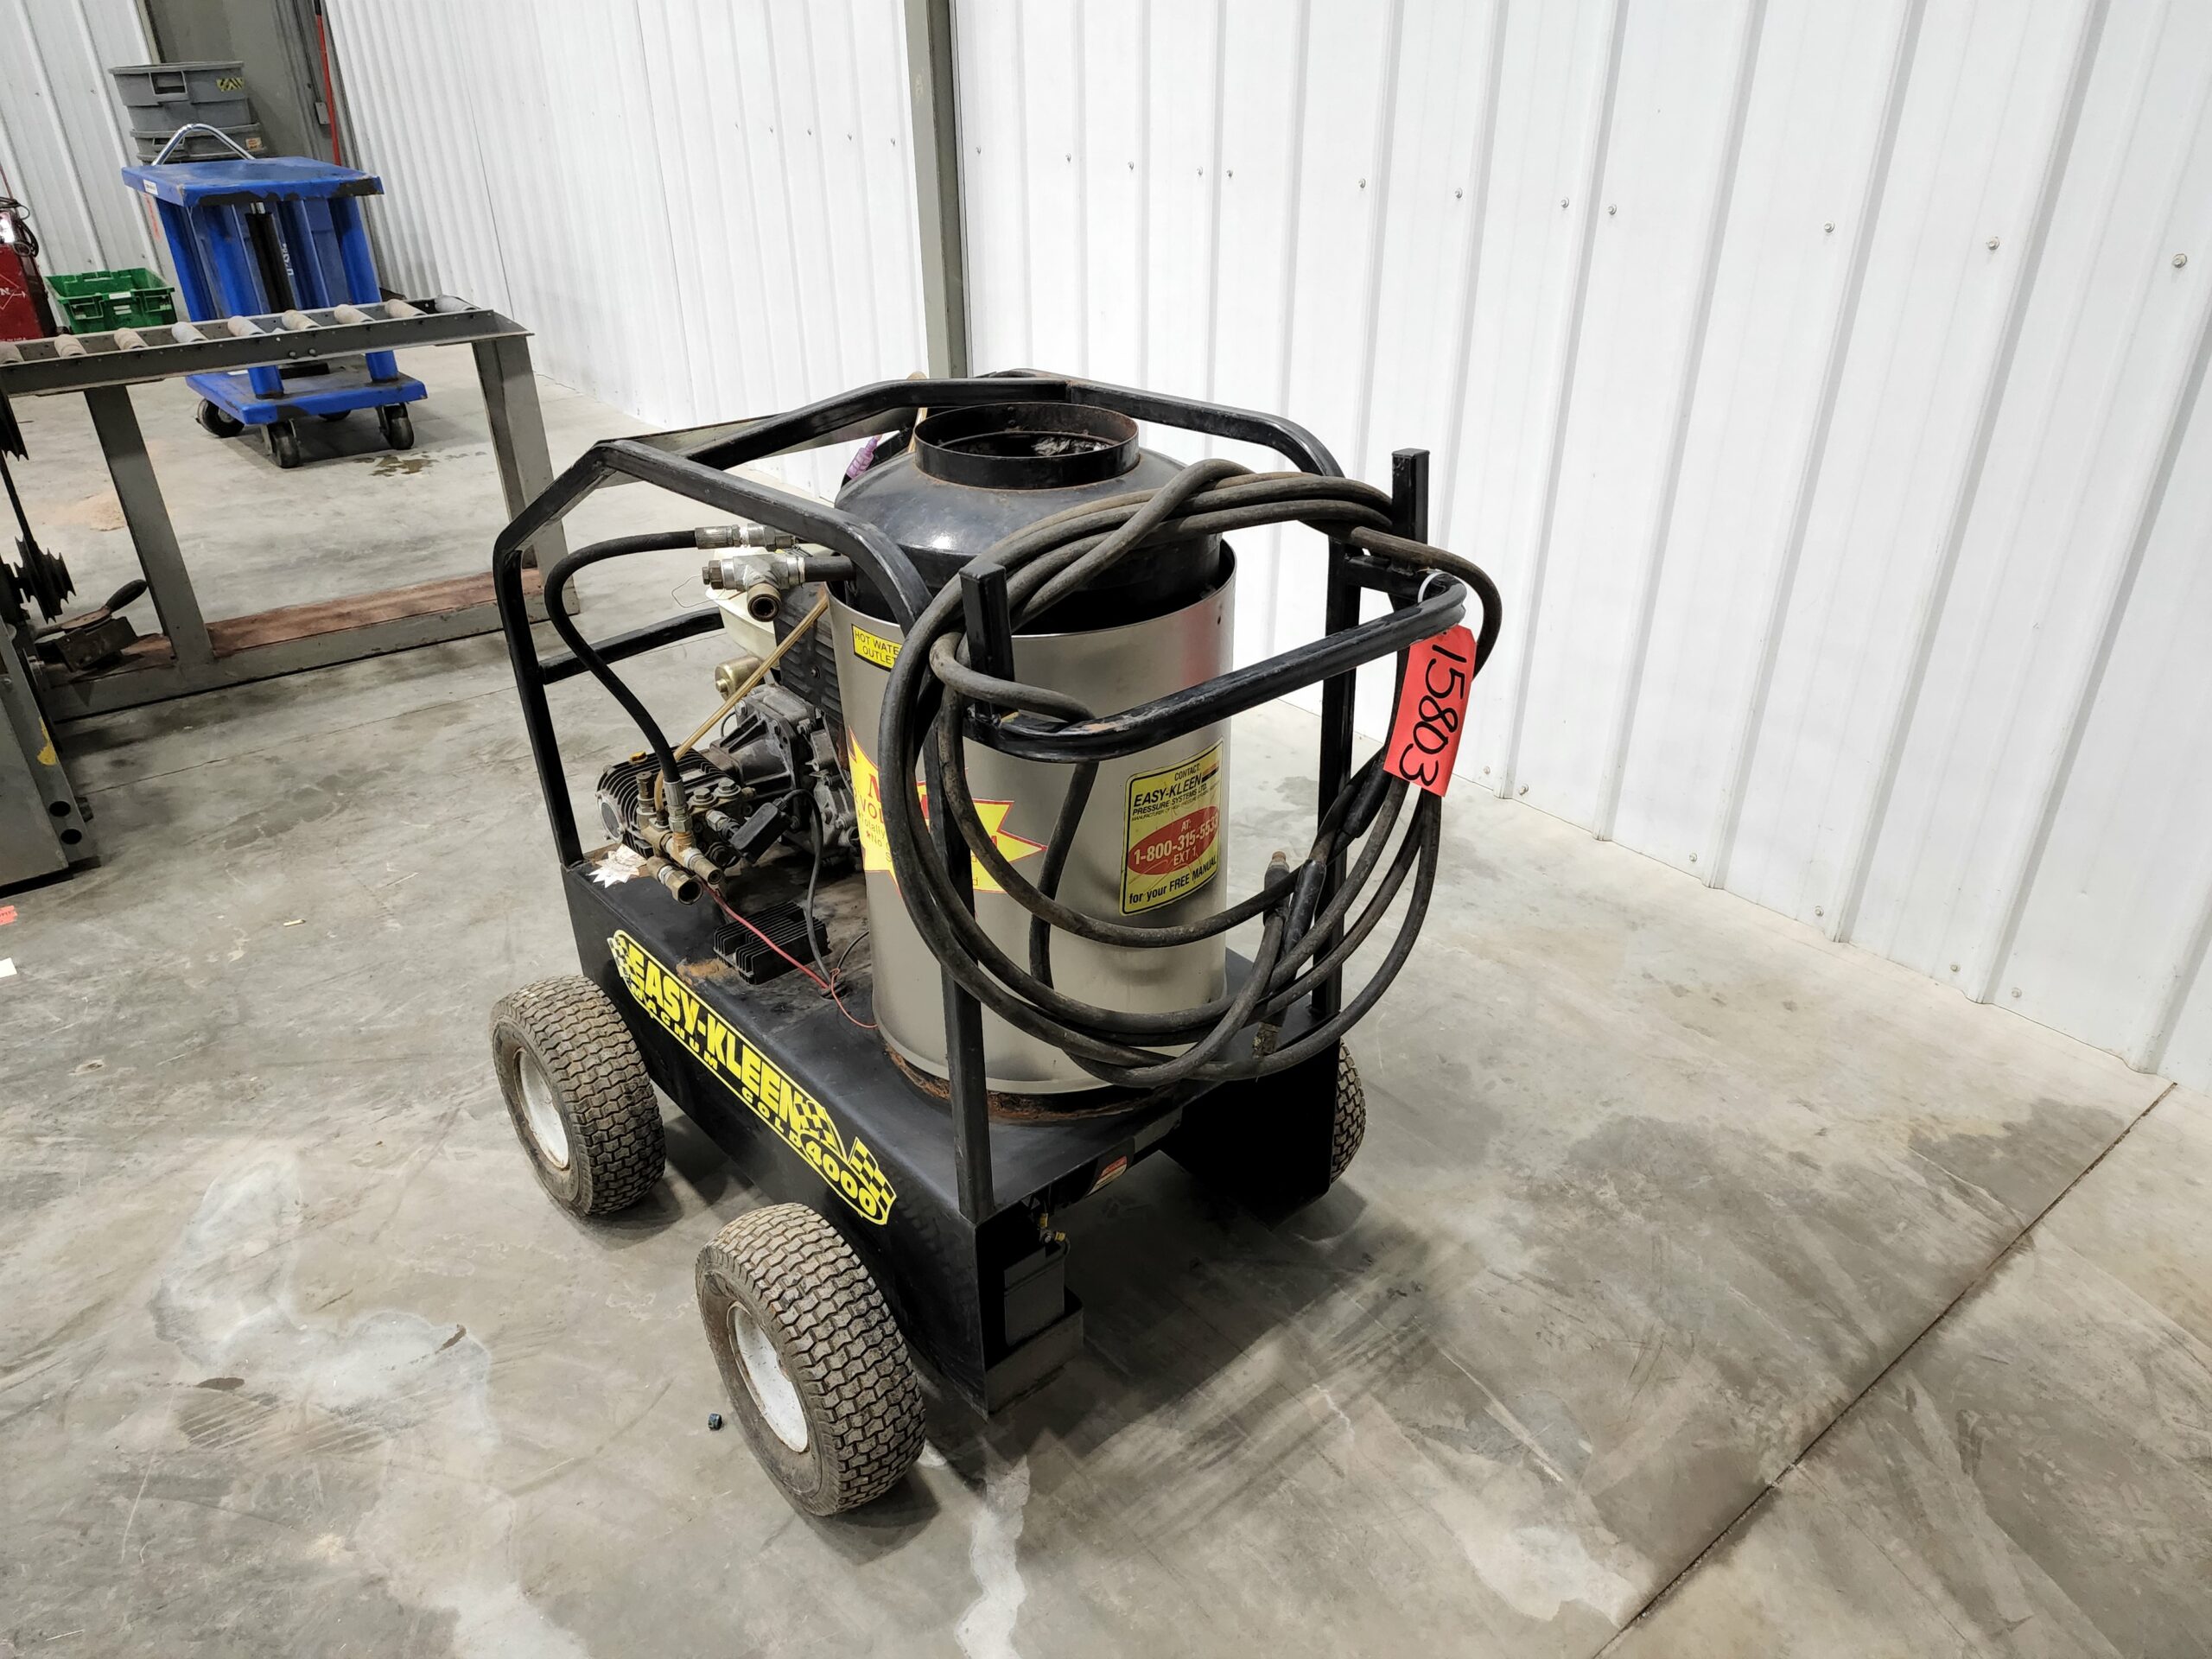 Essy Kleen #RB5050HR, gas heated pressure washer, 15 HP, 4000 psi, #15803  for Sale